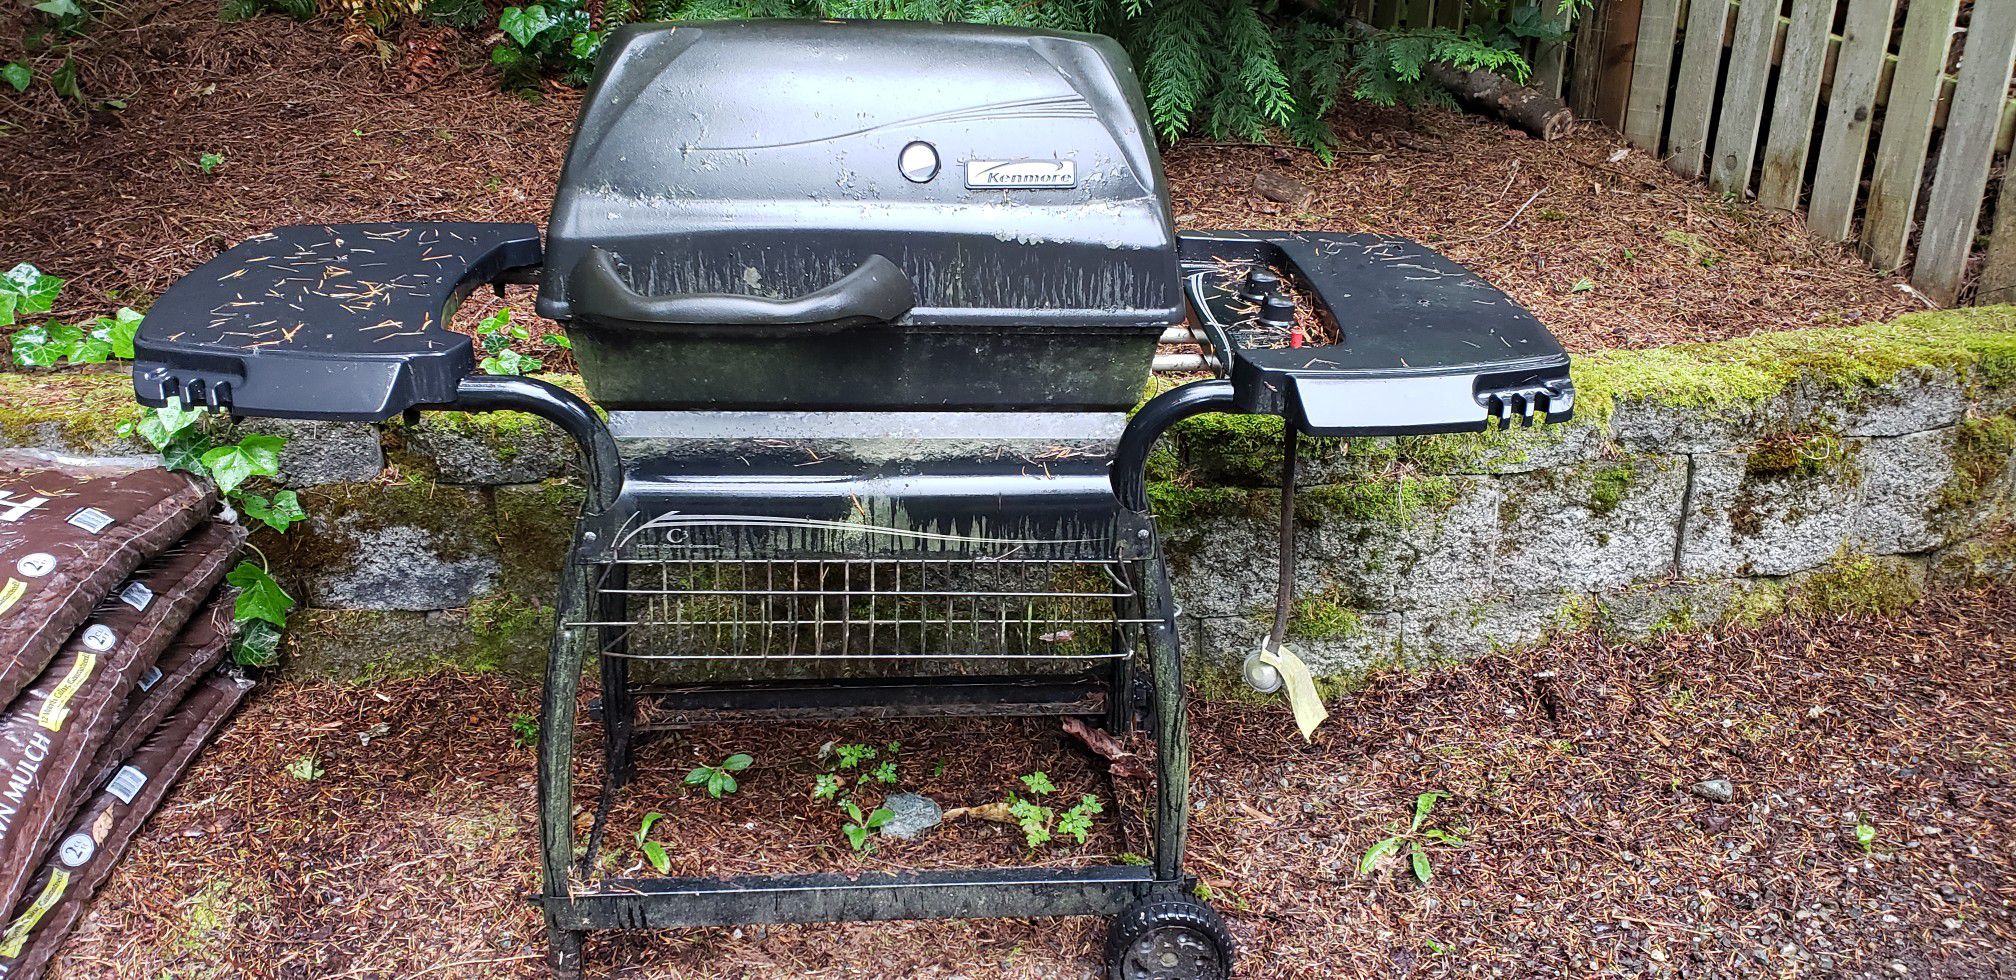 Functioning BBQ grill